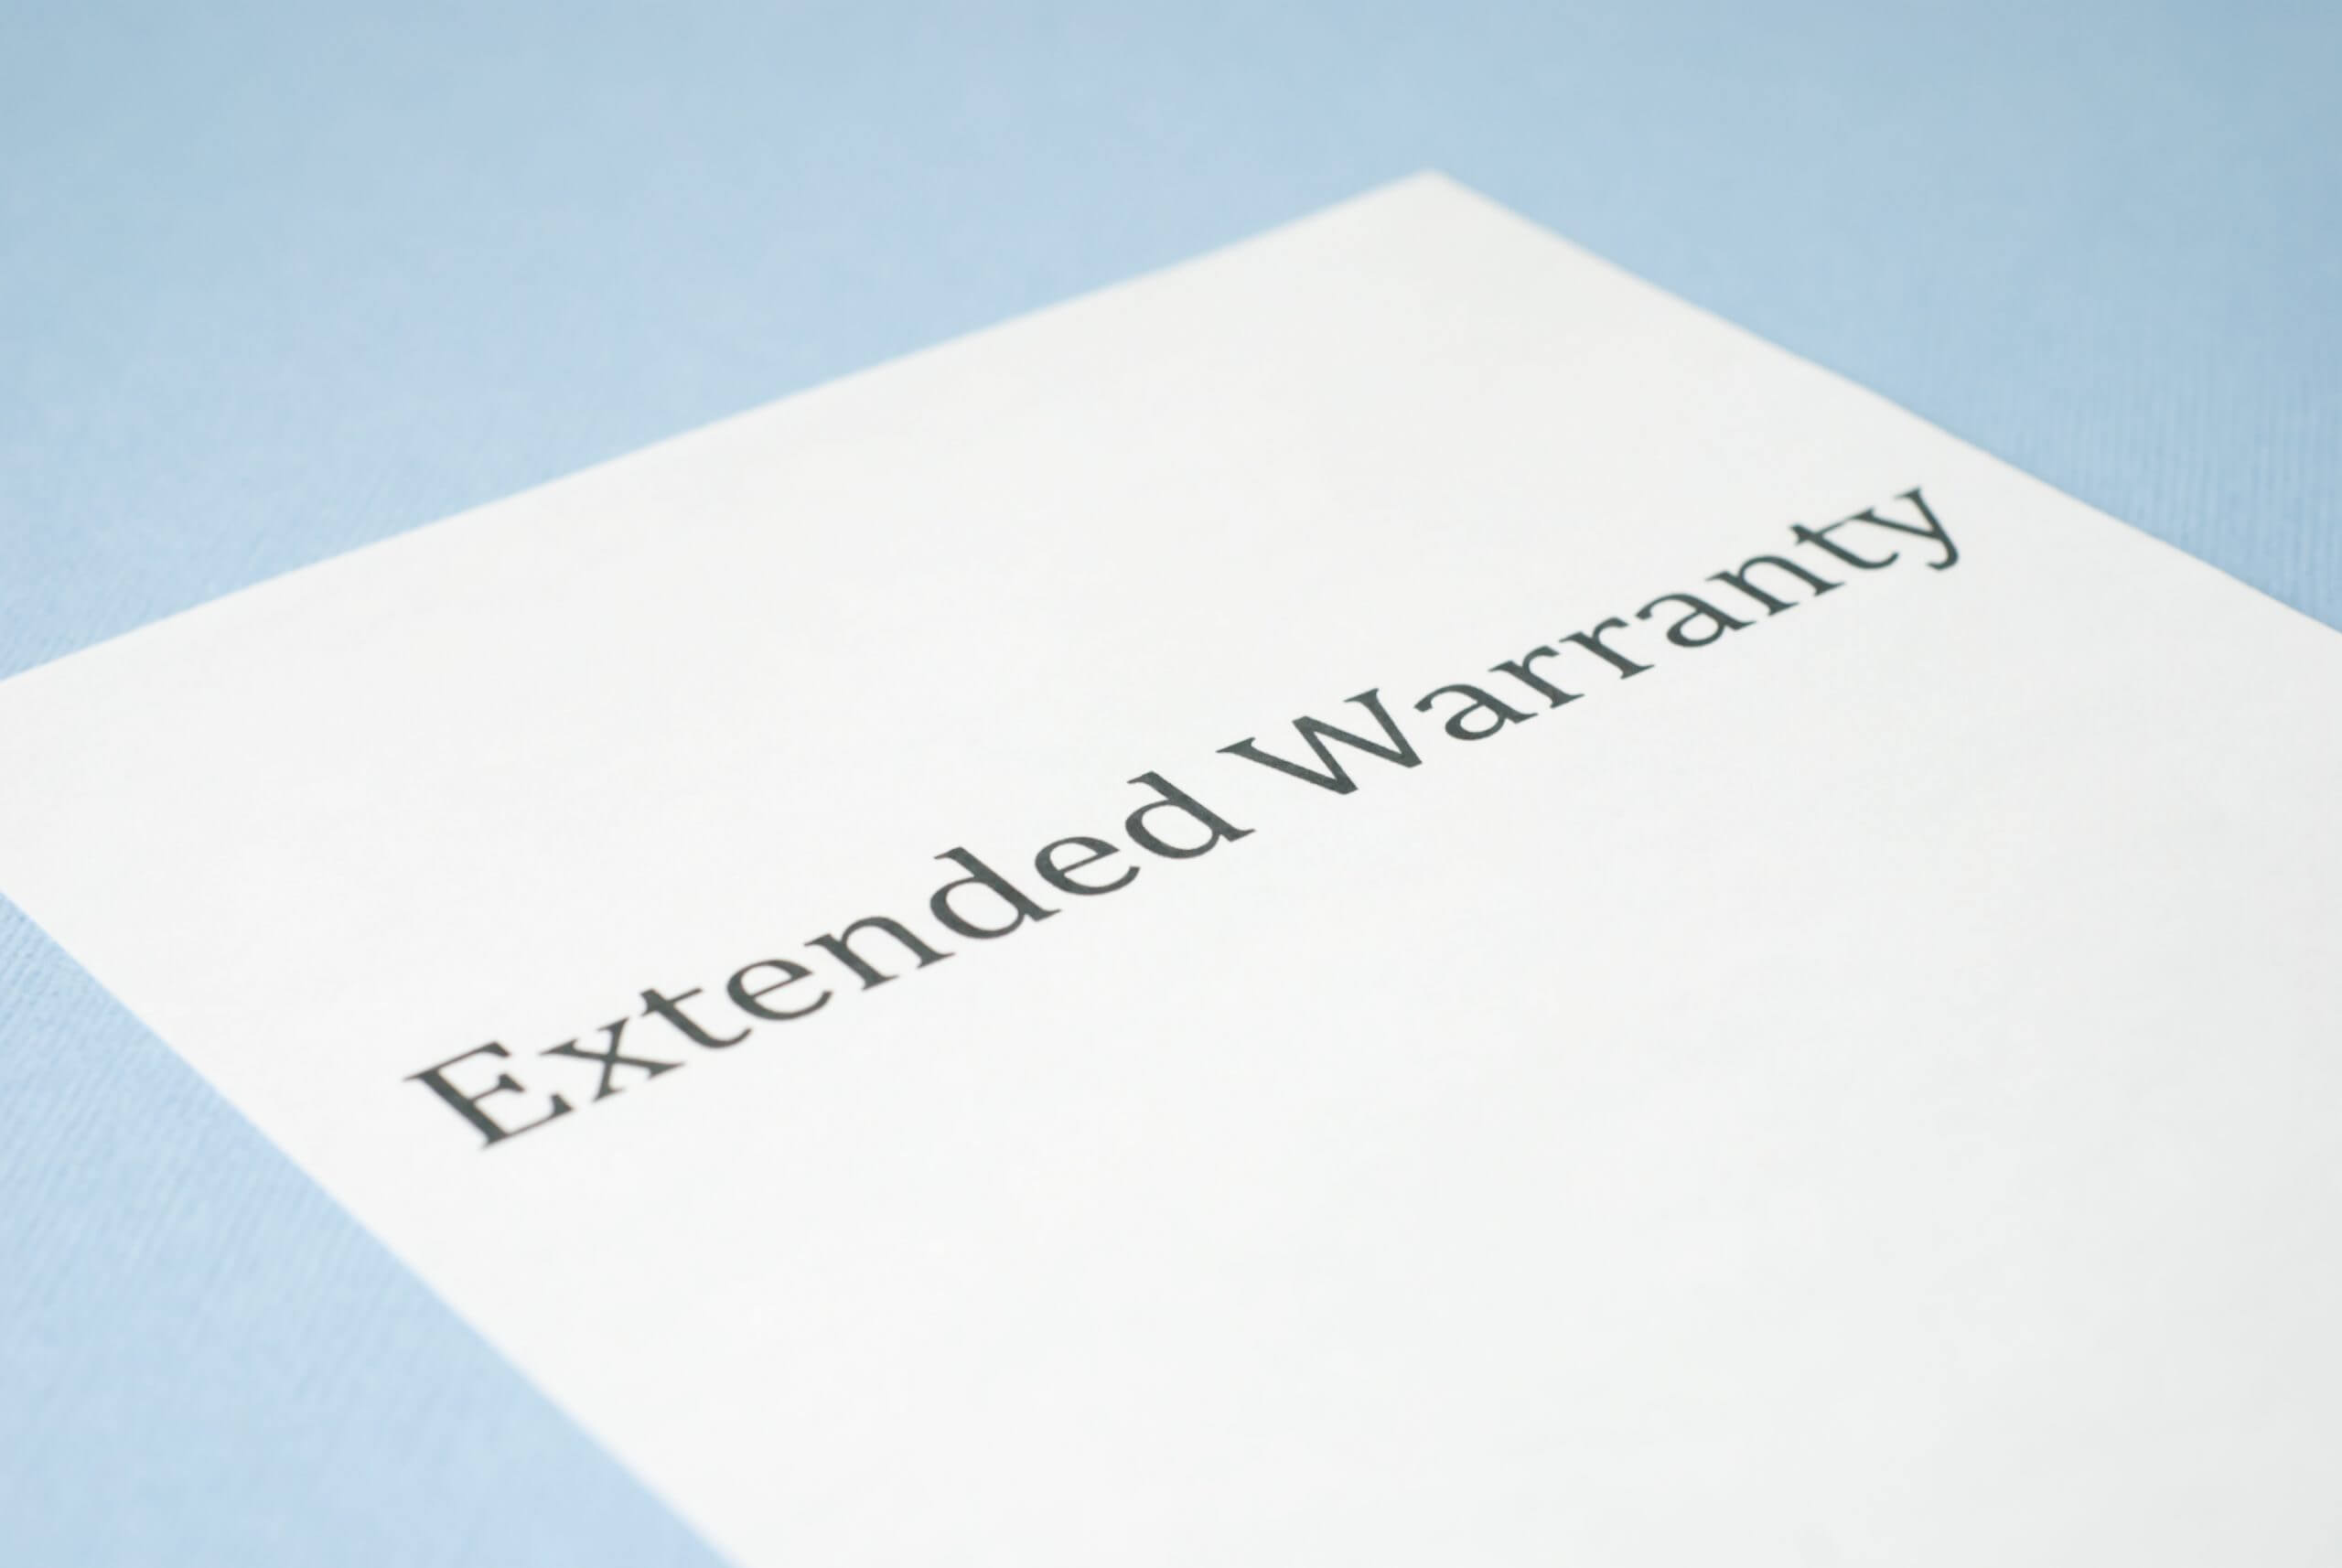 Words " Extended Warranty" printed on a white paper